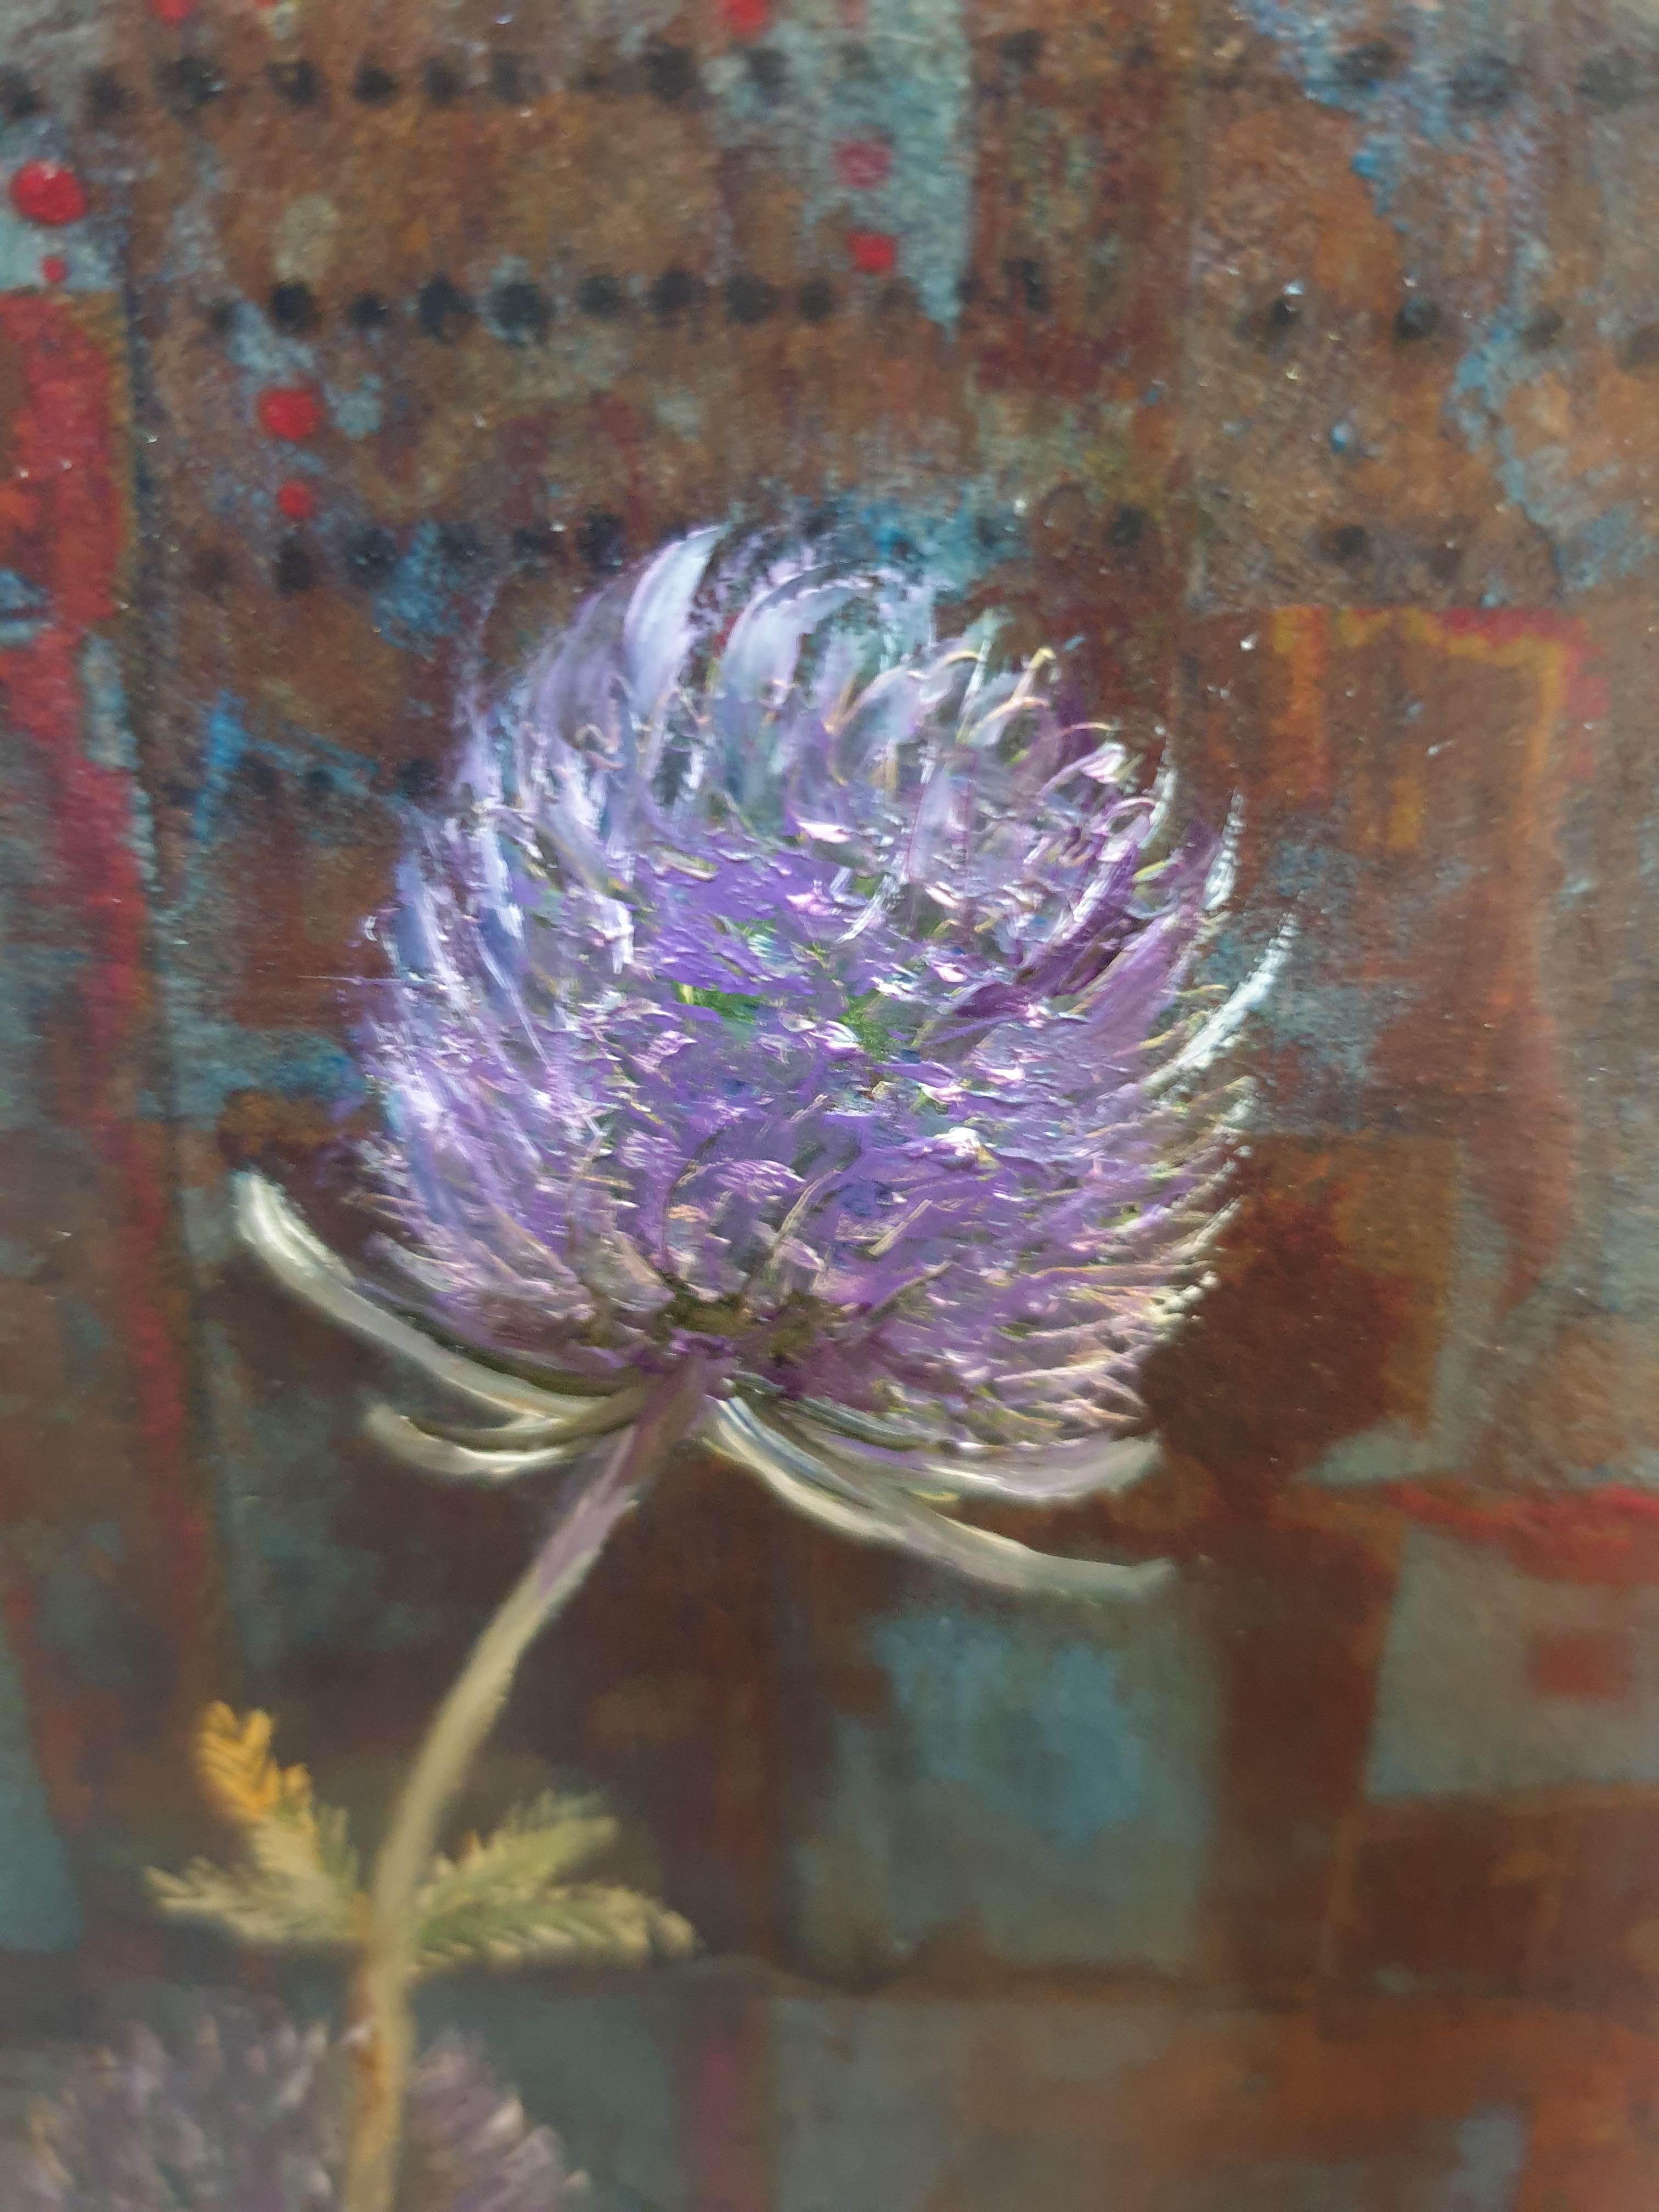 Eryngium. Contemporary botanical mixed-media, oil and acrylic on board by Dutch artist Menno Modderman,  signed and dated 2022 to the bottom right.

Working for several years now as an artist in his atelier in Cotignac in the south of France, Menno,